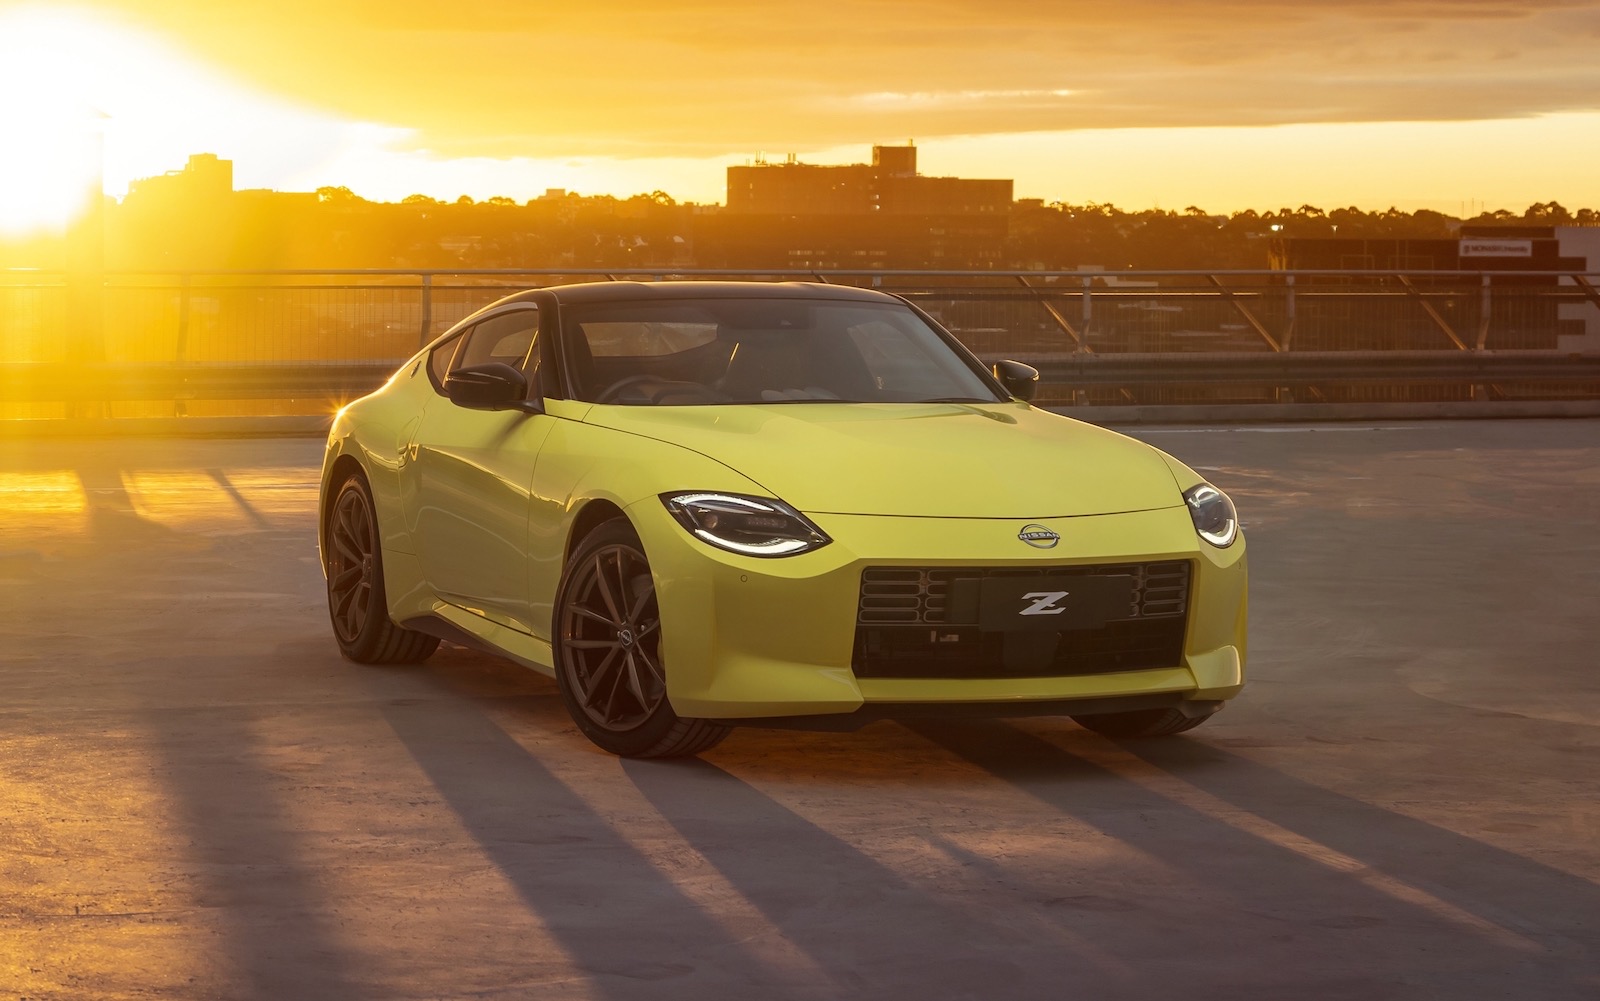 All-new Nissan Z Proto edition sold out in Australia